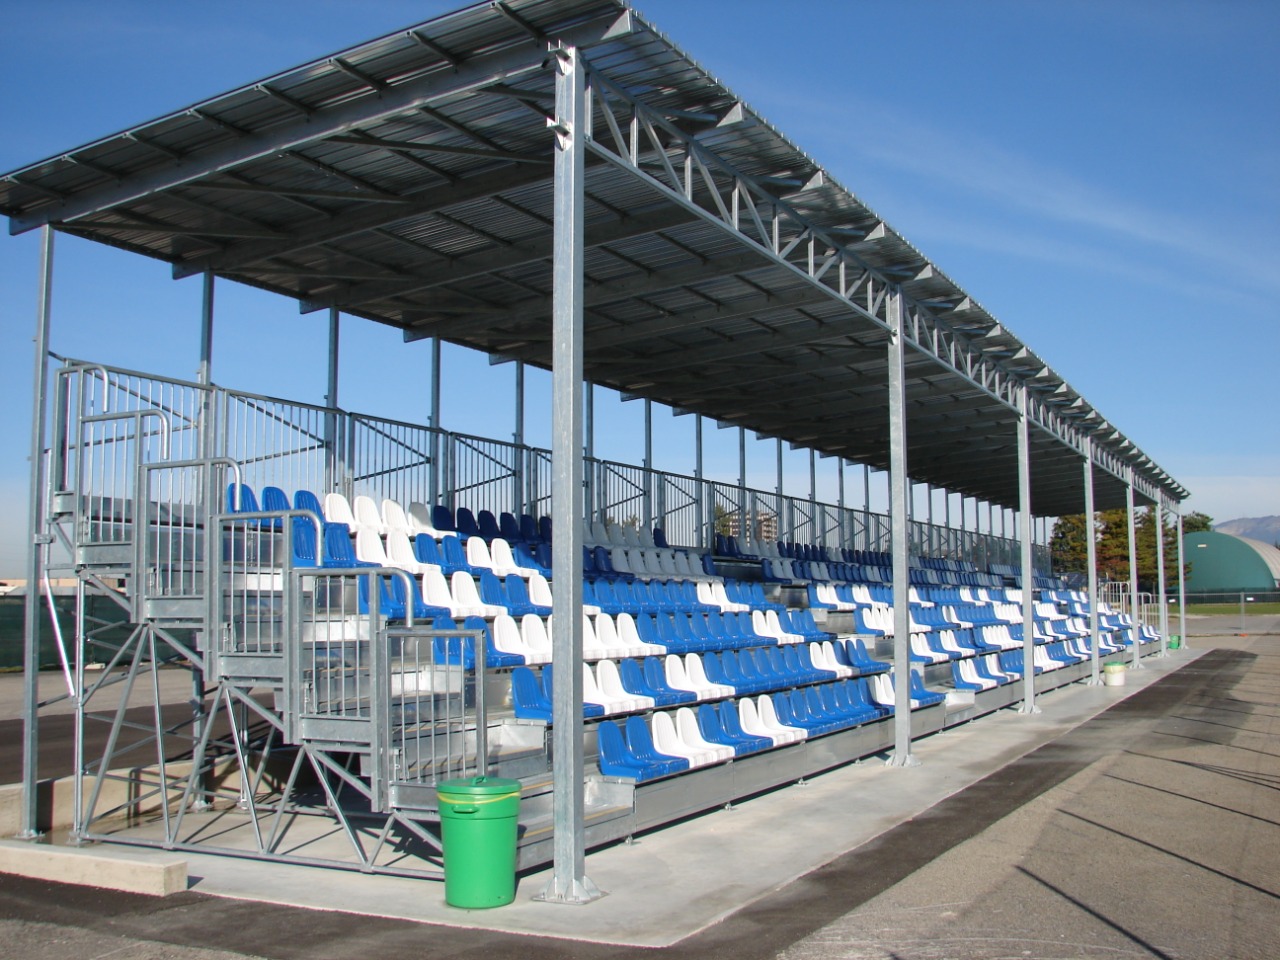 Gallery foto n.1 Prefabricated stands - Atalanta training center 